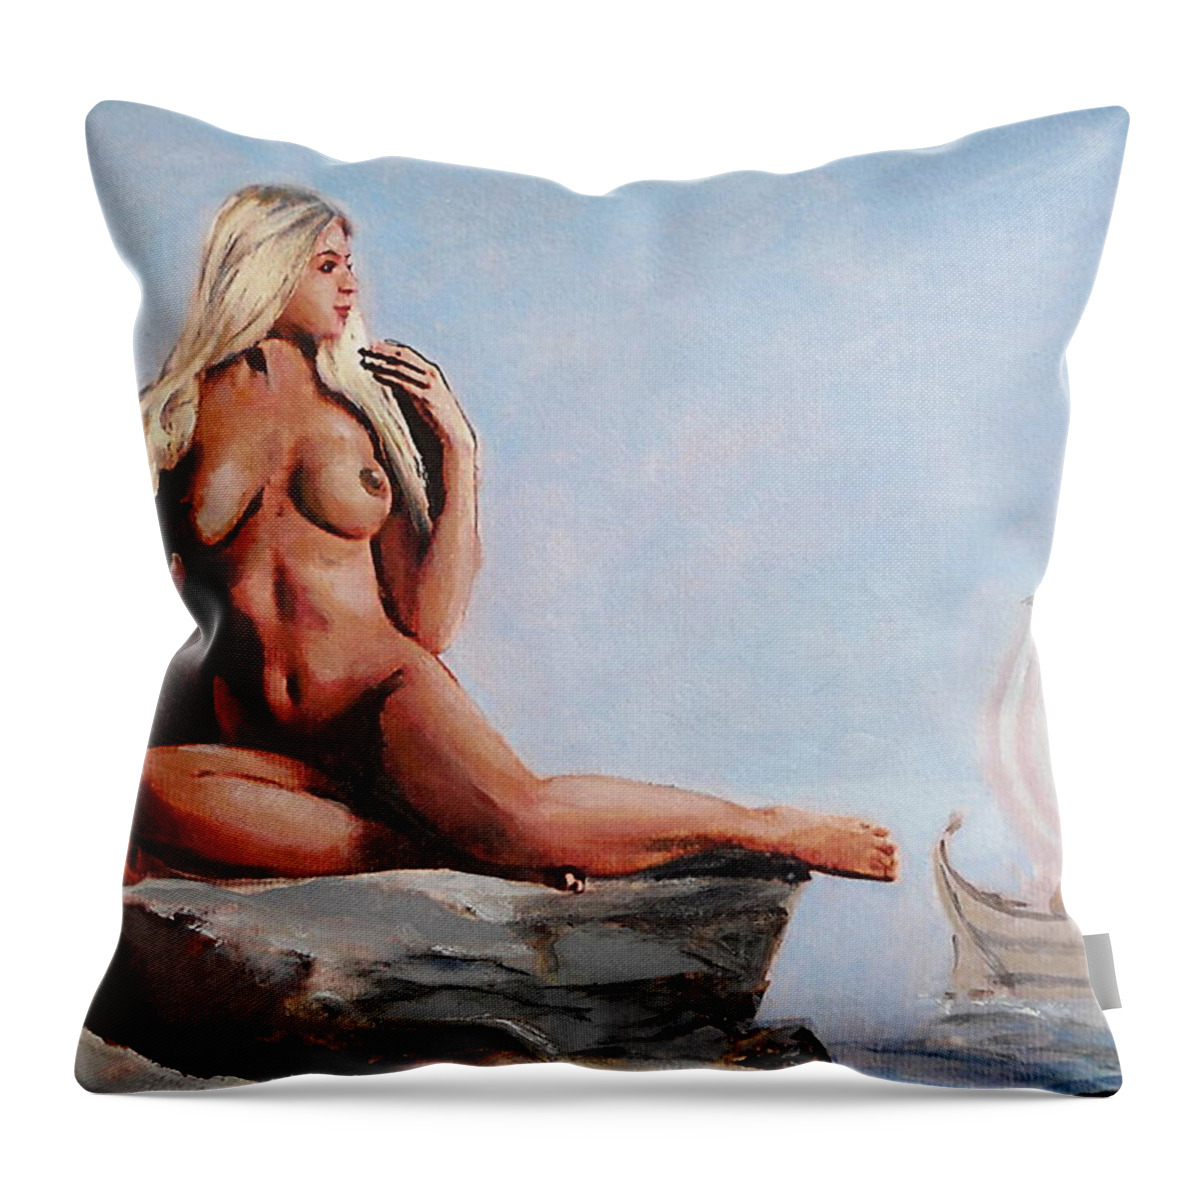 Original Throw Pillow featuring the painting Fine Art Female Nude Jennie As Seanympth Goddess Multimedia Painting by G Linsenmayer